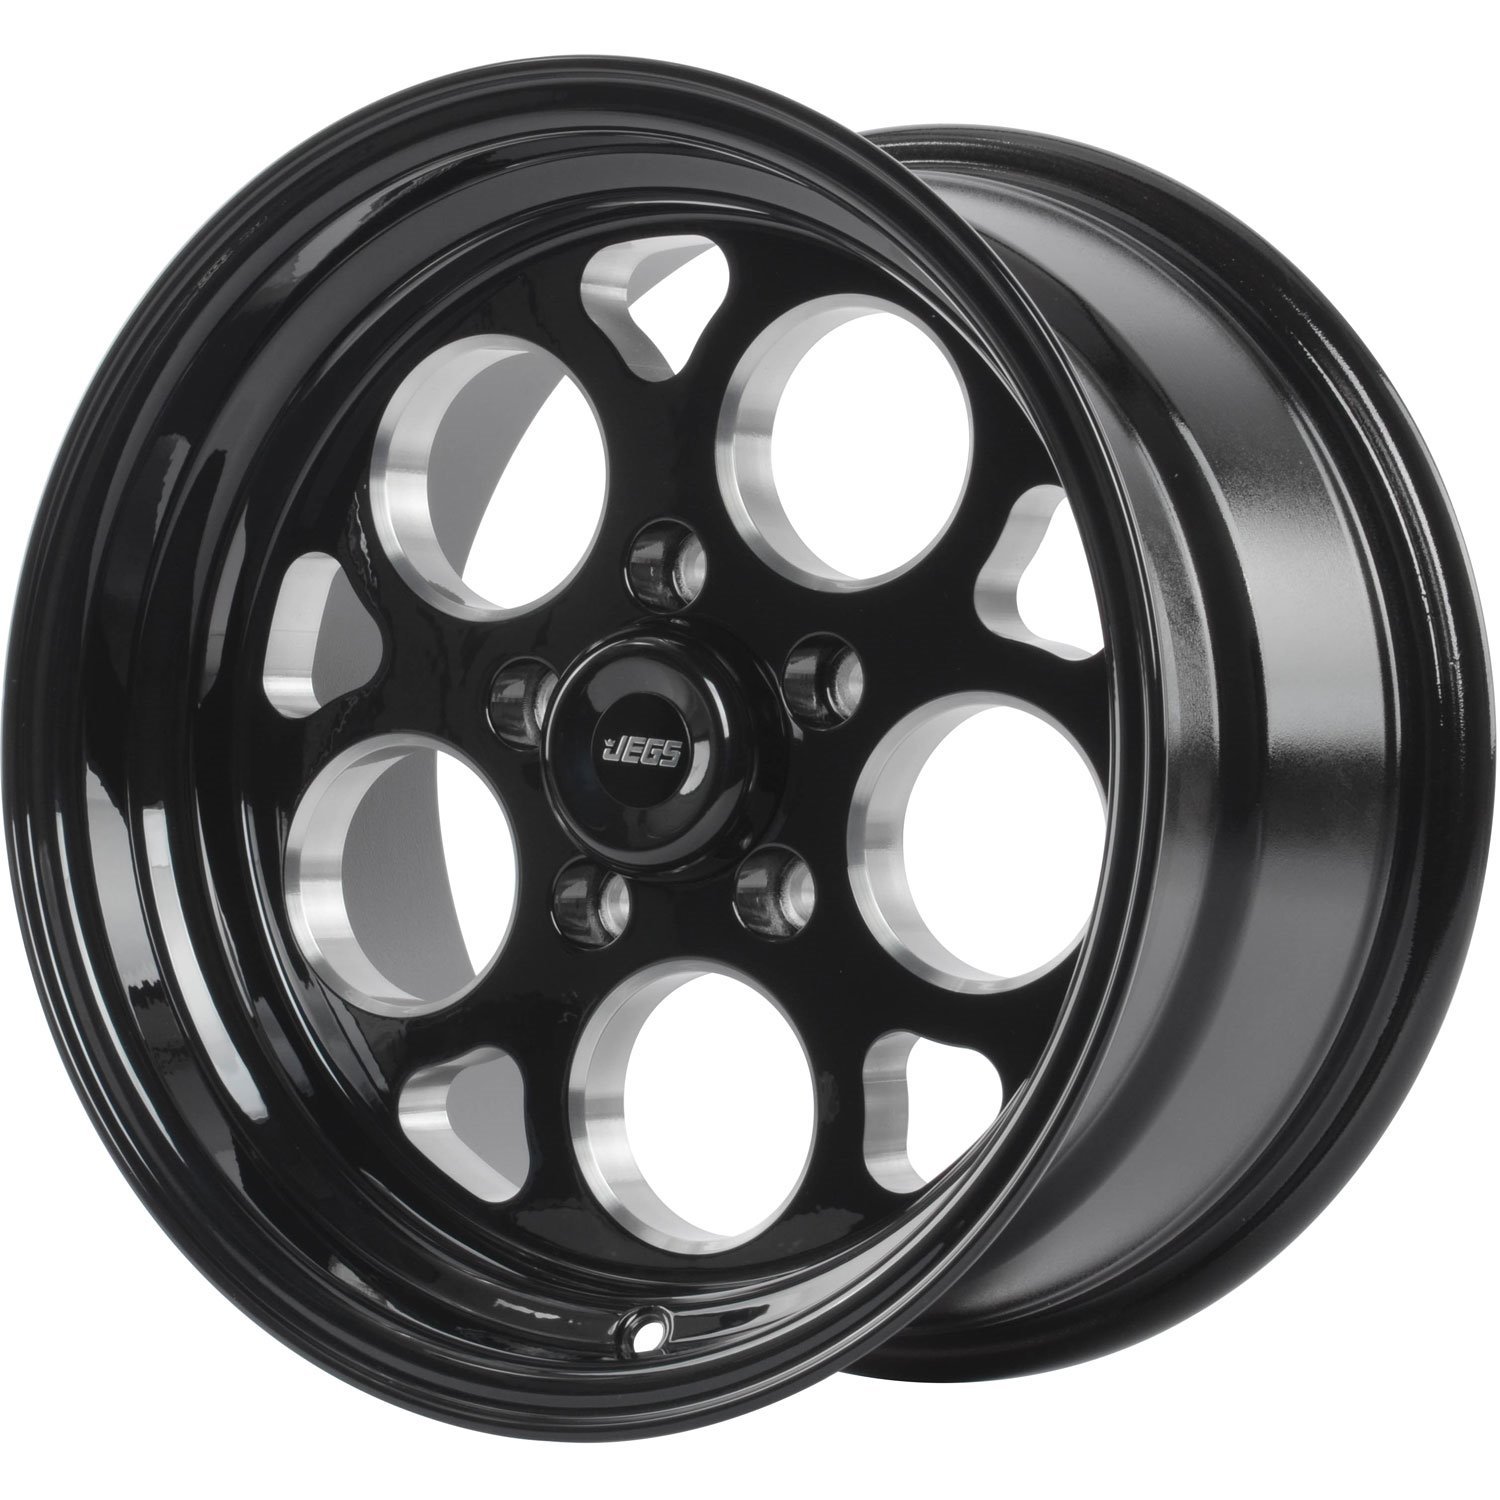 JEGS Performance Products SSR Mag Wheel Diameter & Width 15